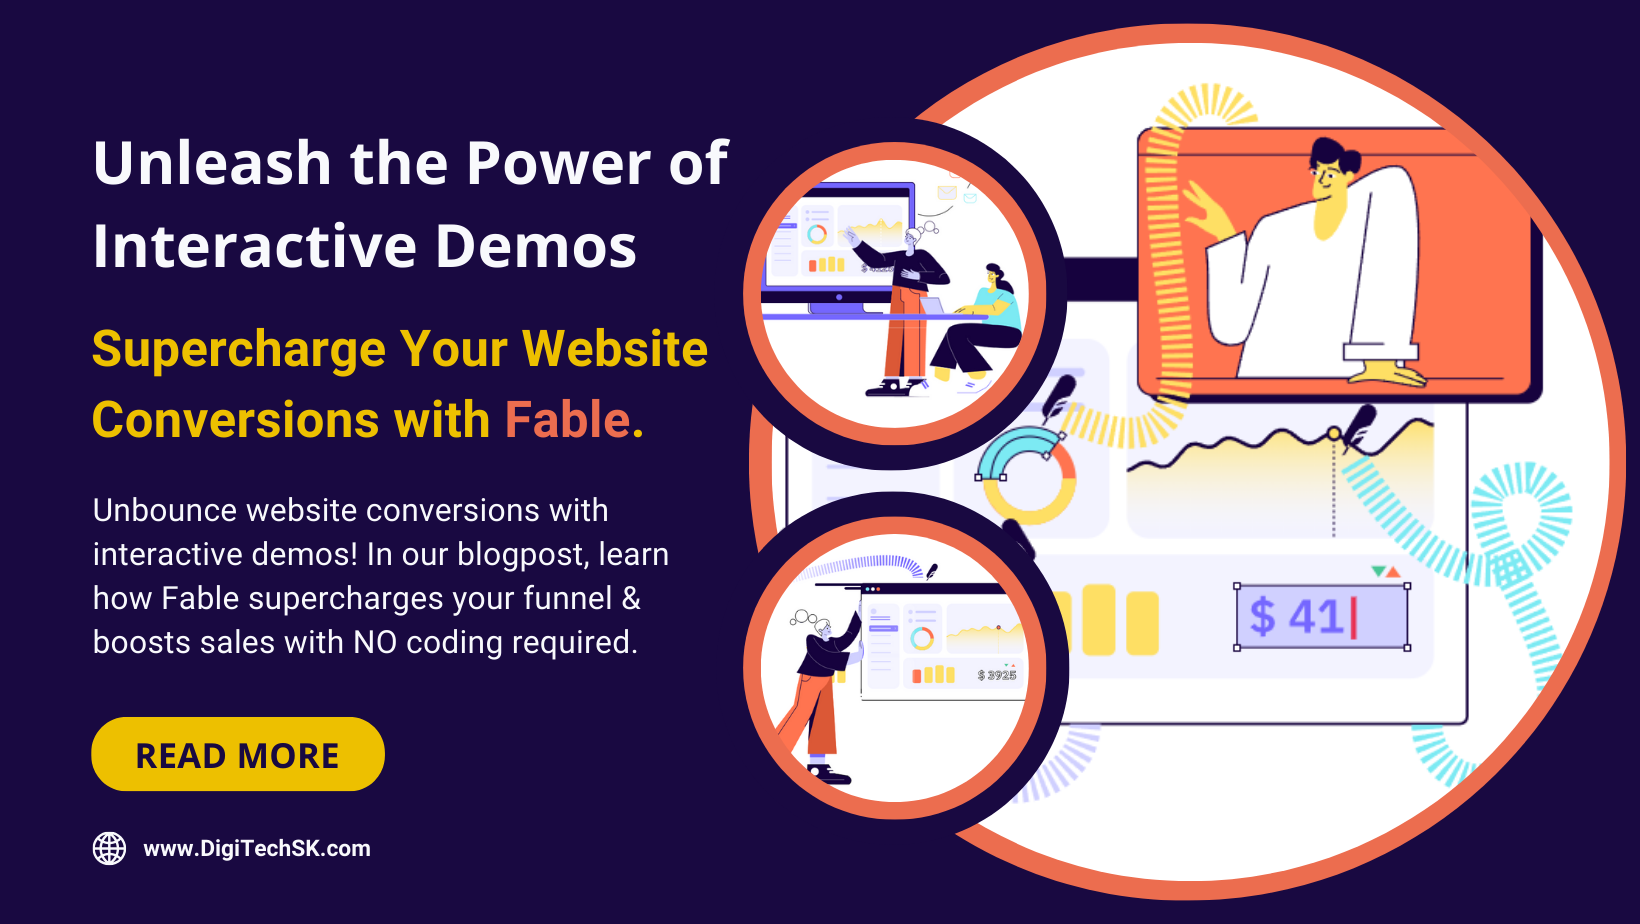 Unleash the Power of Interactive Demos: Supercharge Your Website Conversions with Fable.